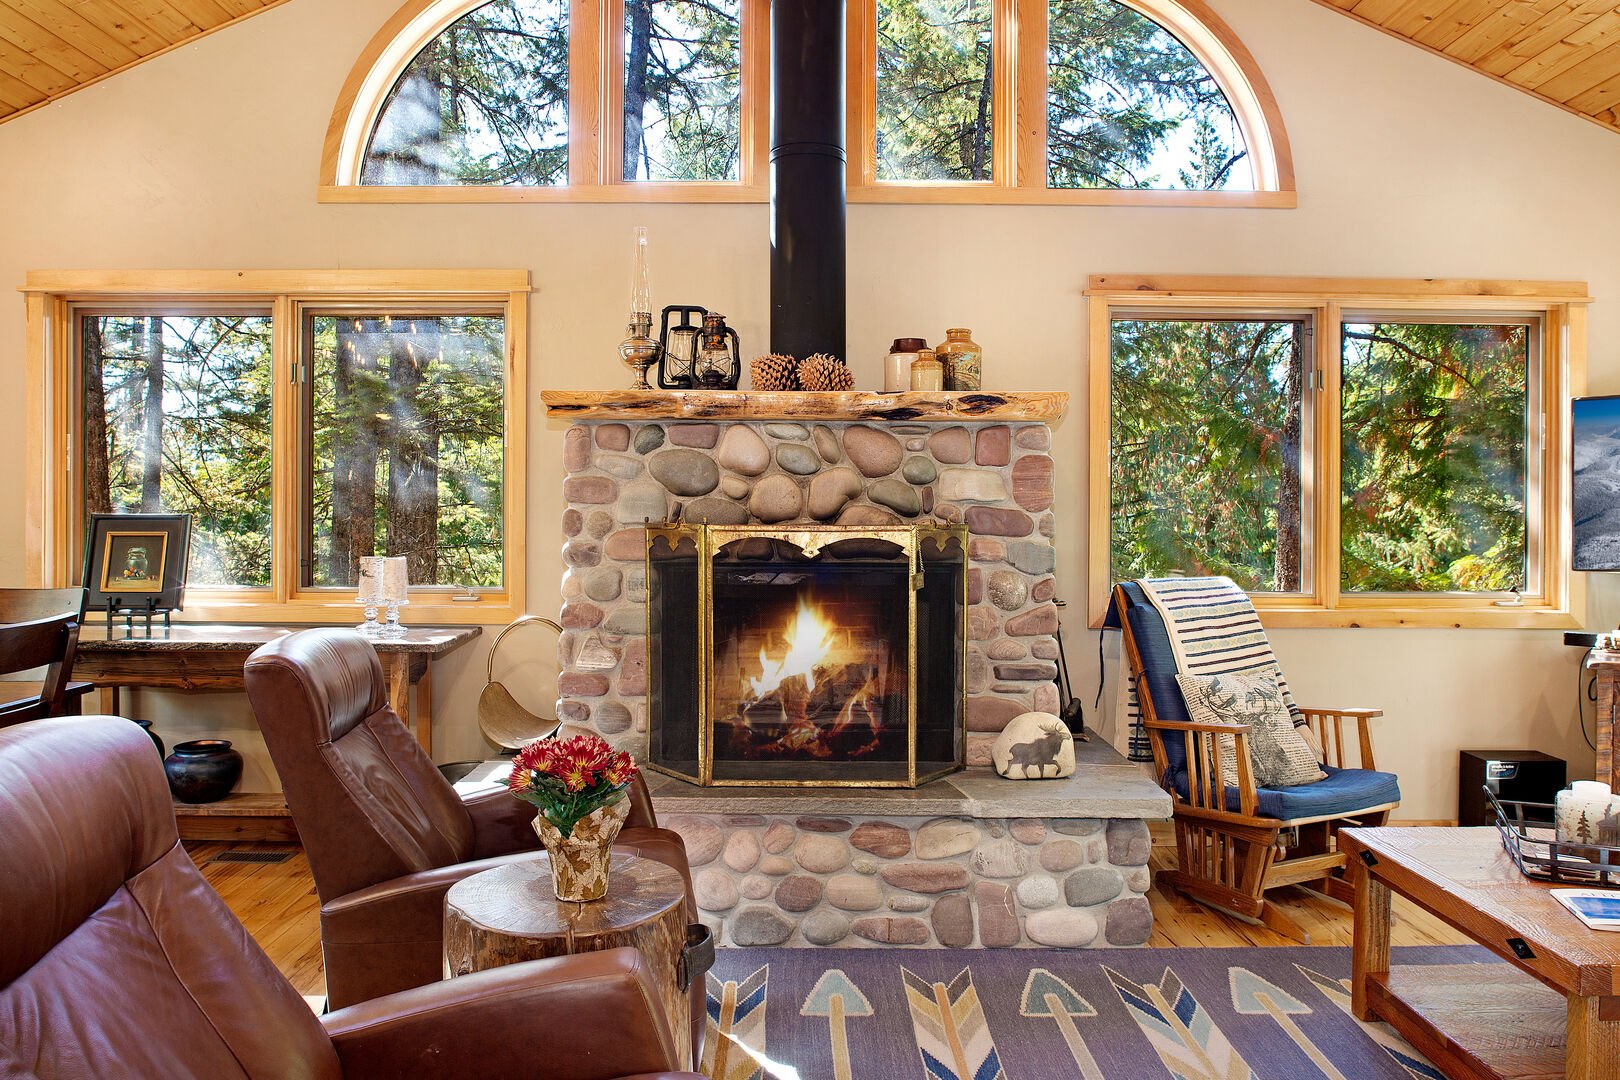 The interior of one of our spacious New Year's Montana vacation home rentals.